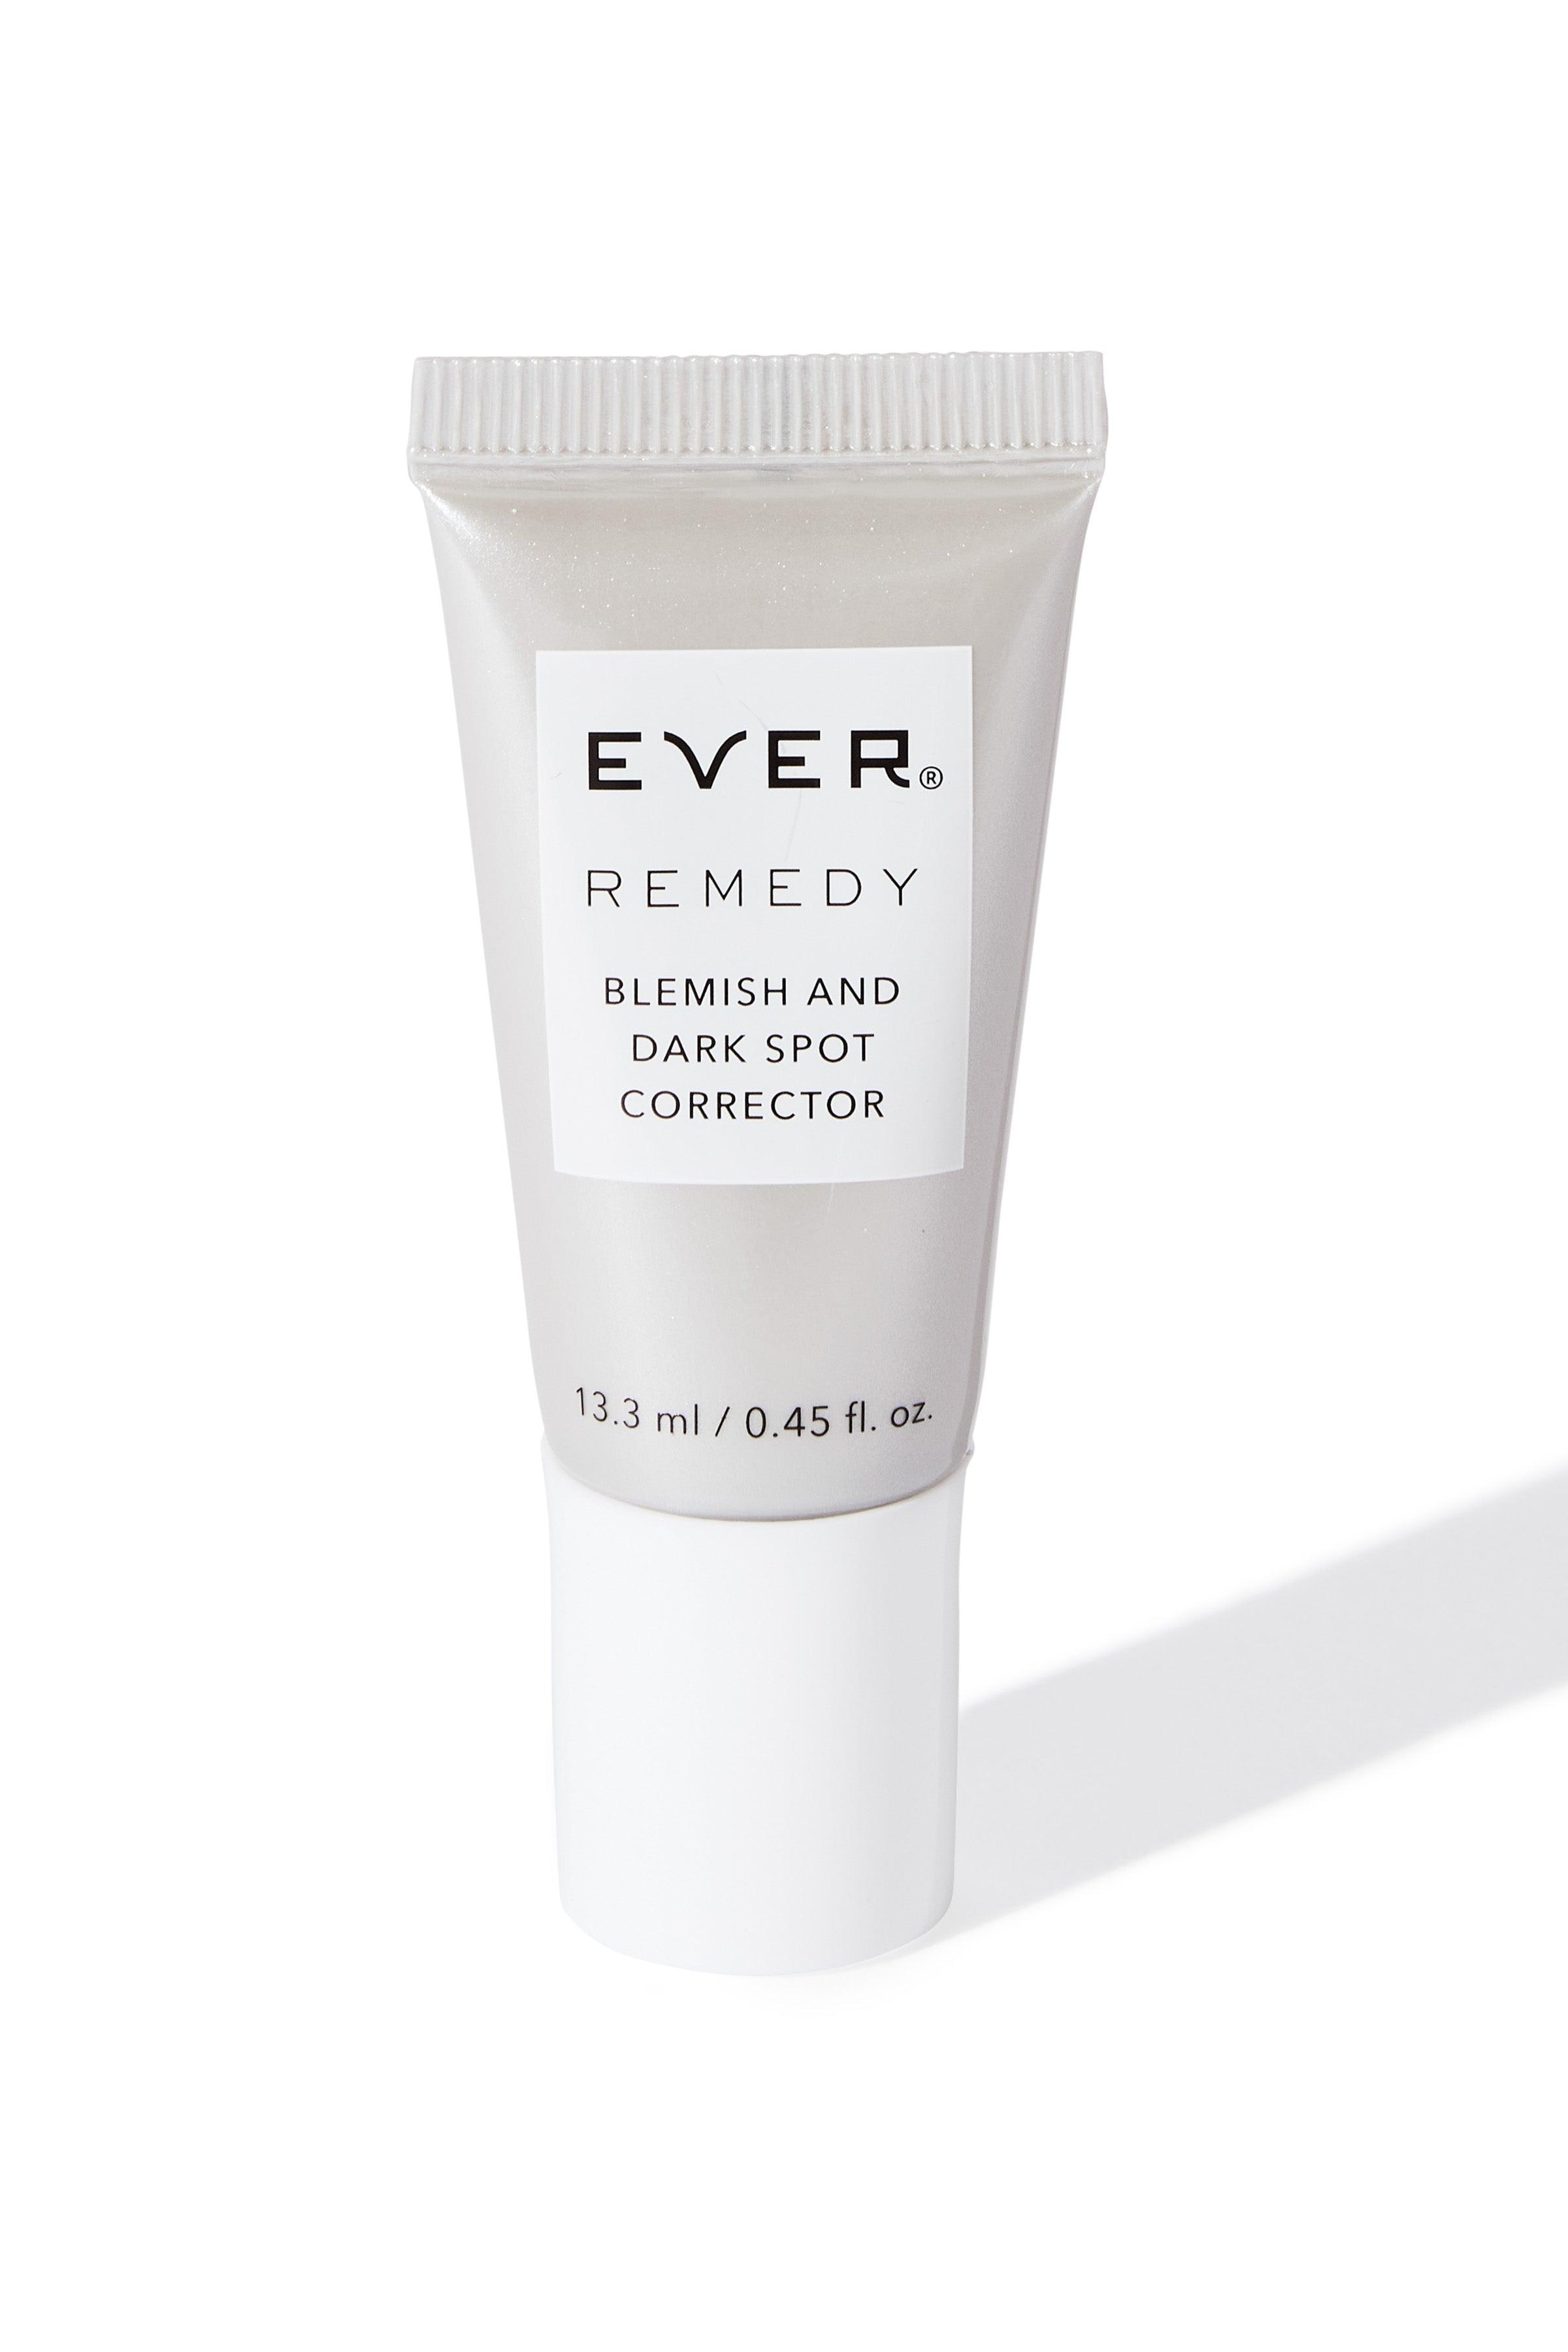 REMEDY Blemish and Dark Spot Corrector - EVER